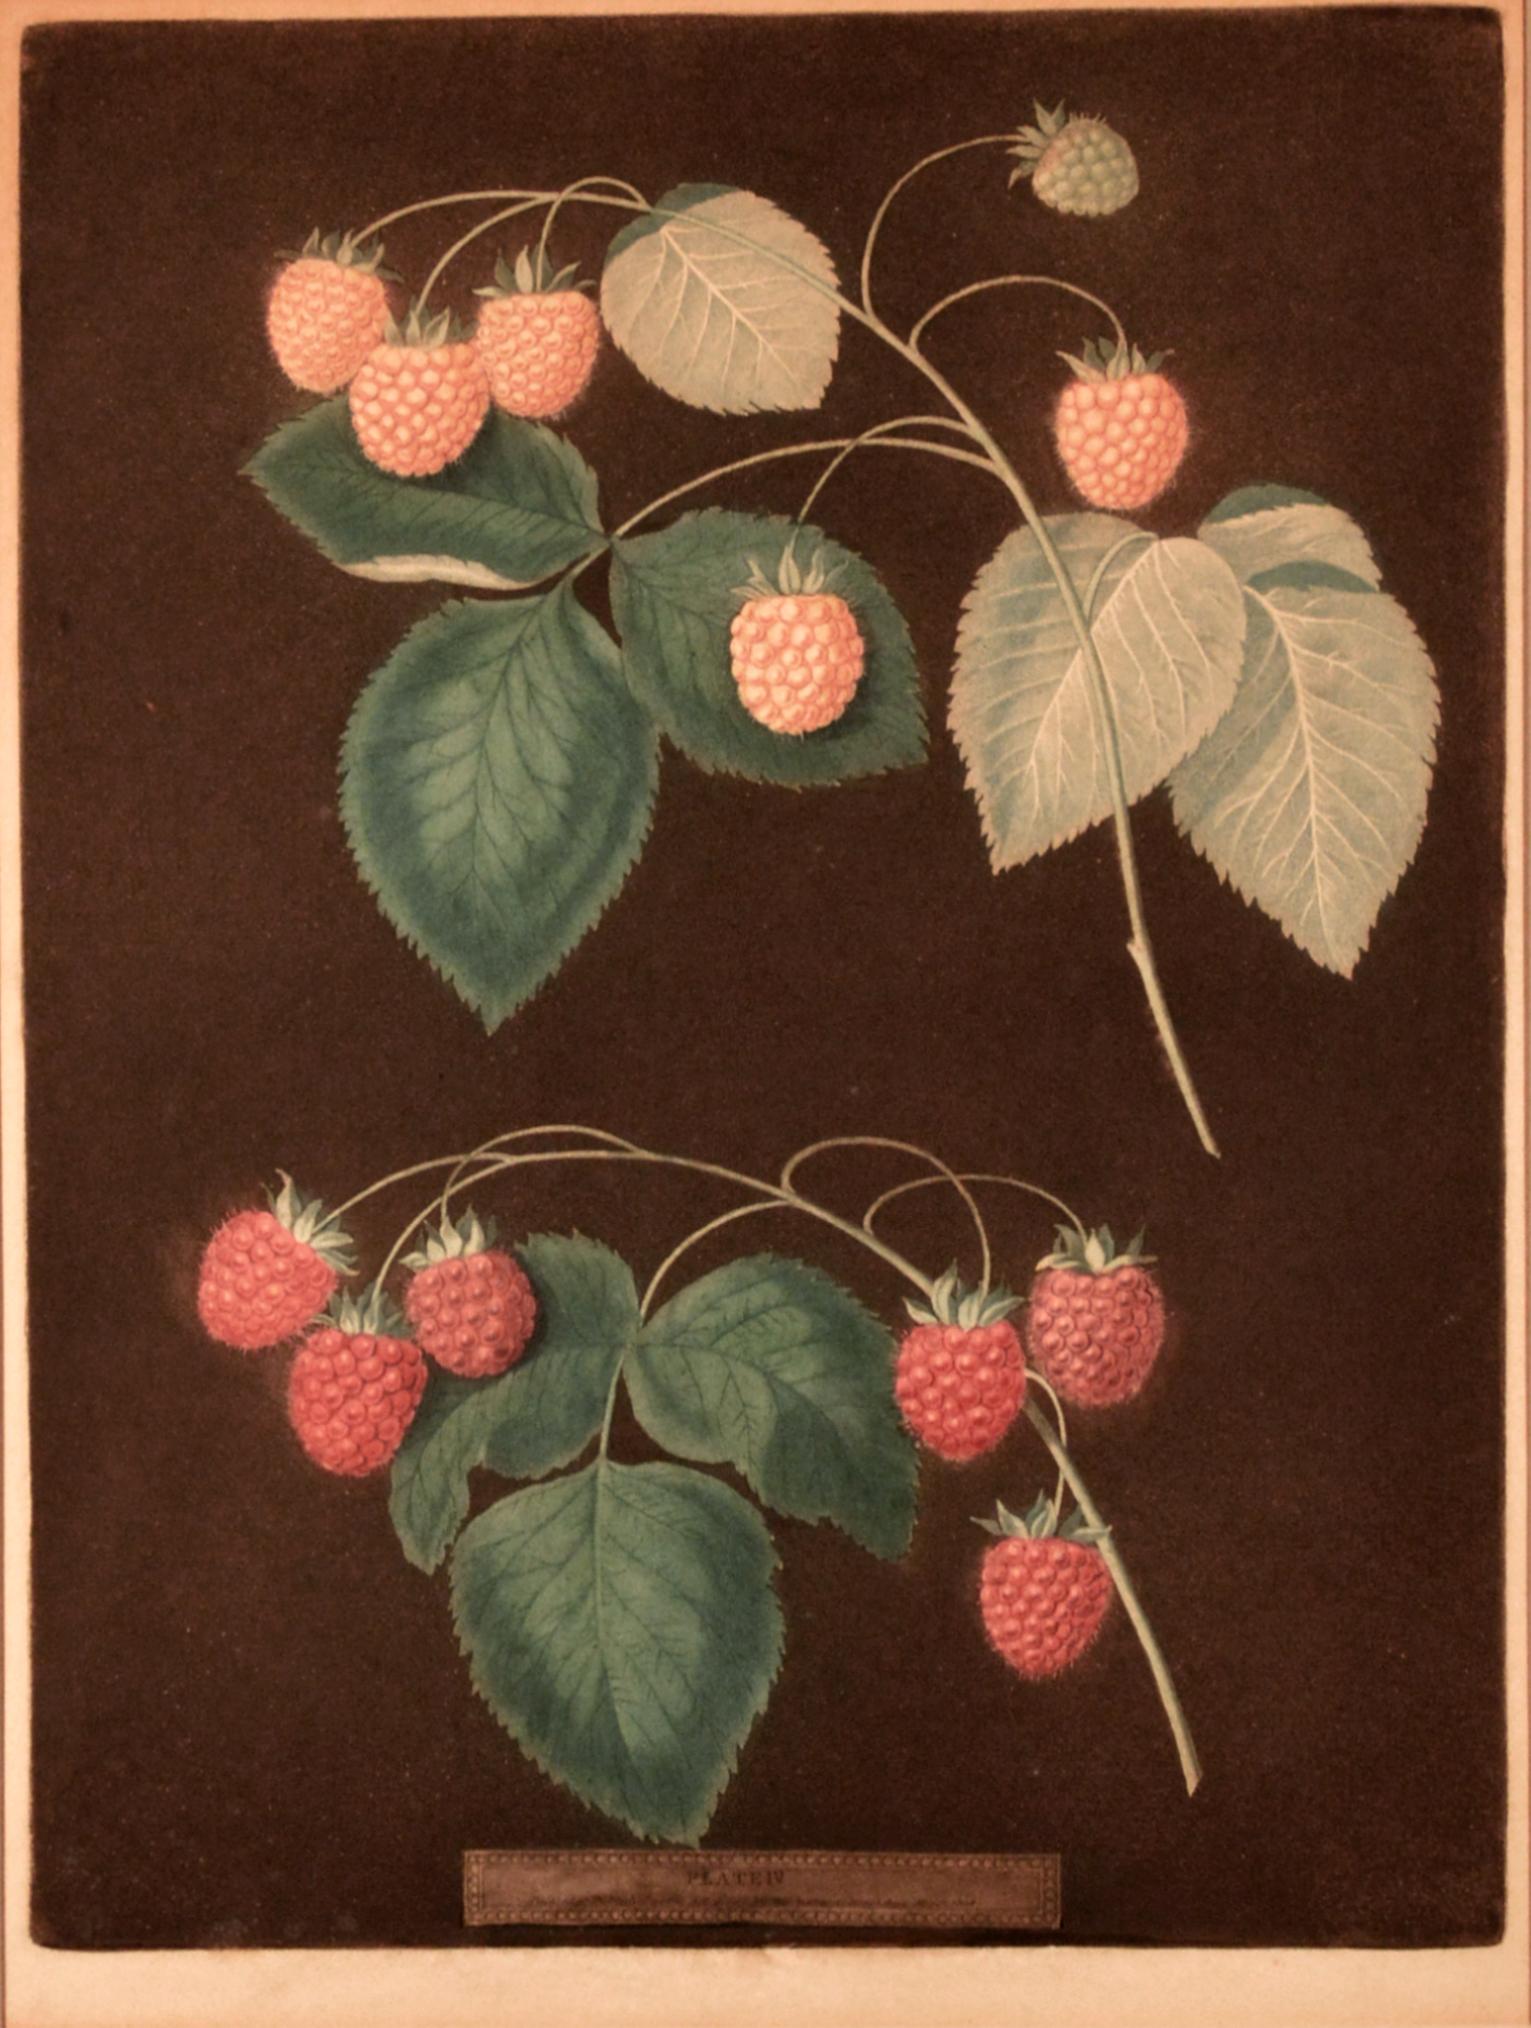 George Brookshaw print of two varieties of raspberries, one yellow and one red.
Plate IV,
from Natural History Art, Botanical, Fruit, Brookshaw, Pomona Britannica,
Dated 1804

The applied publication legion below and center-reads plate IV, painted